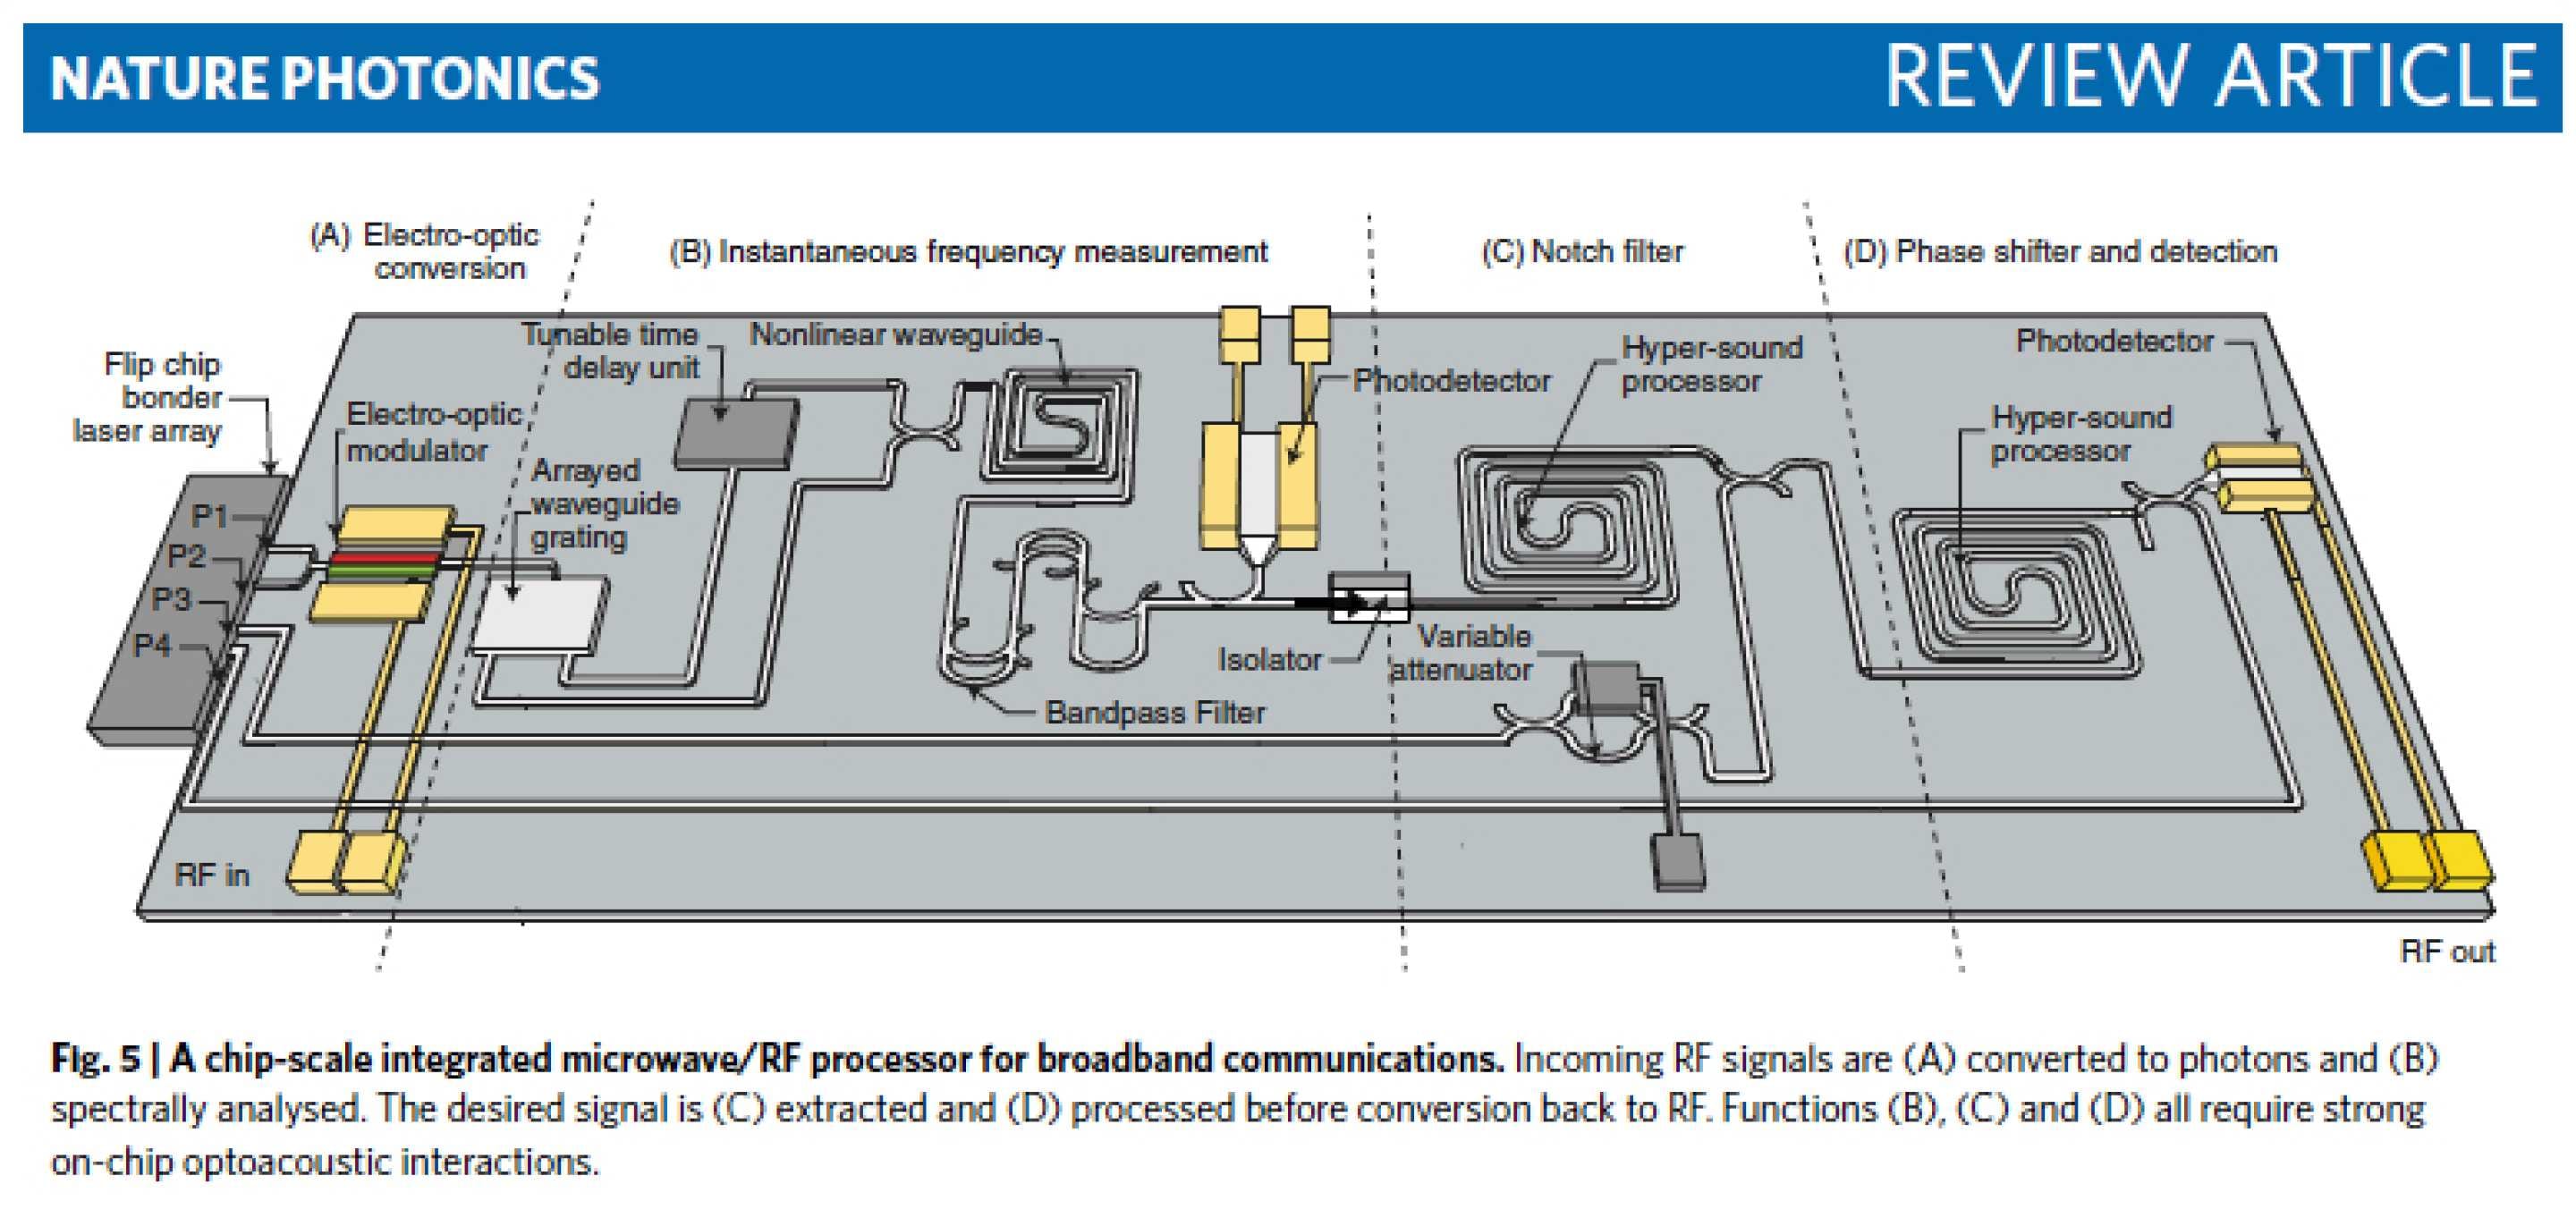 Conceptual illustration of an integrated processer using stimulated Brillouin scattering components.